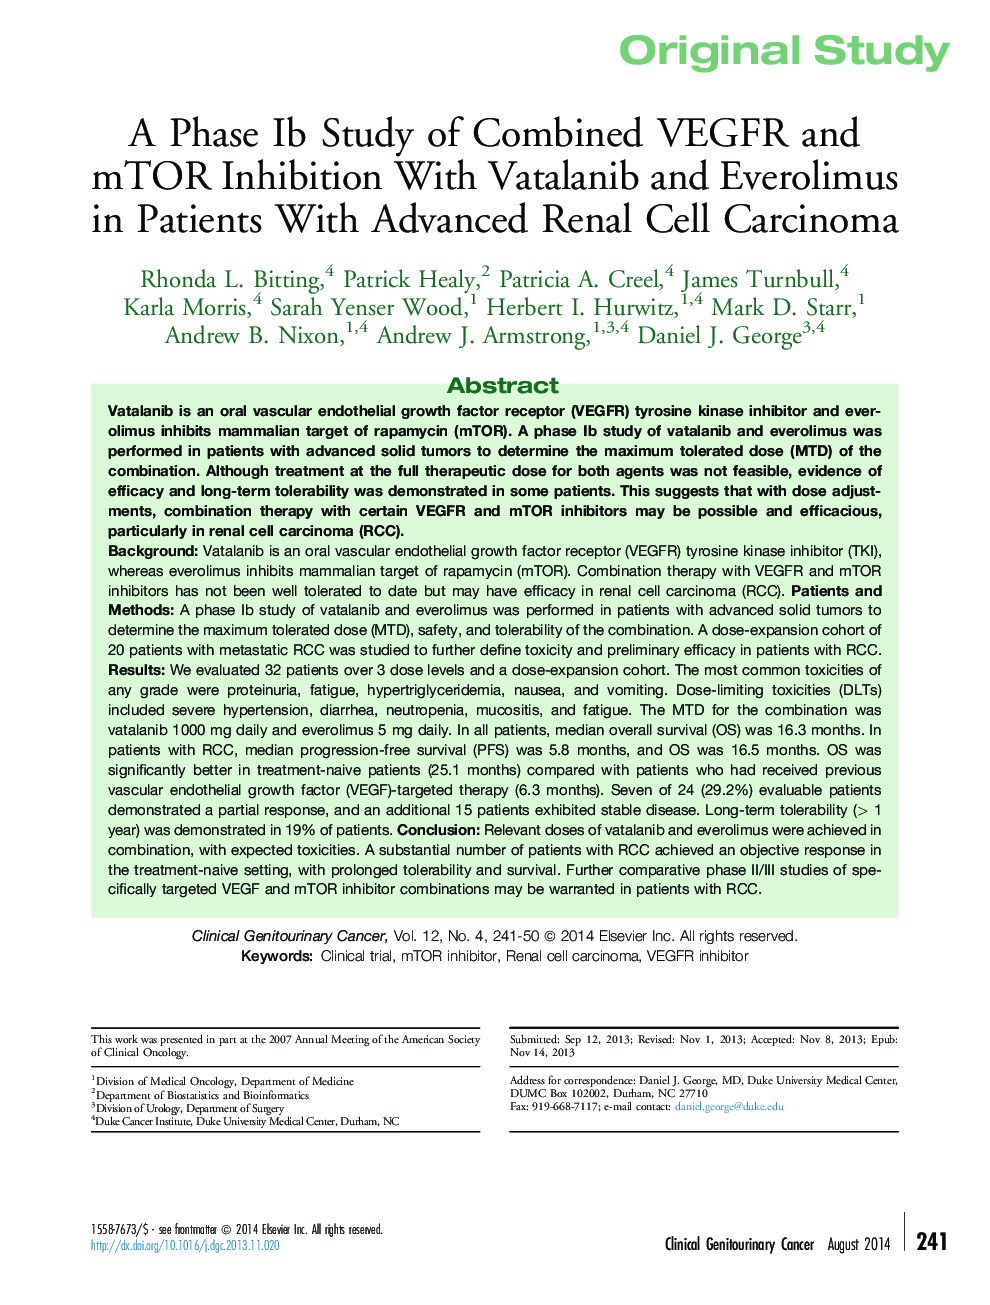 A Phase Ib Study of Combined VEGFR and mTOR Inhibition With Vatalanib and Everolimus in Patients With Advanced Renal Cell Carcinoma